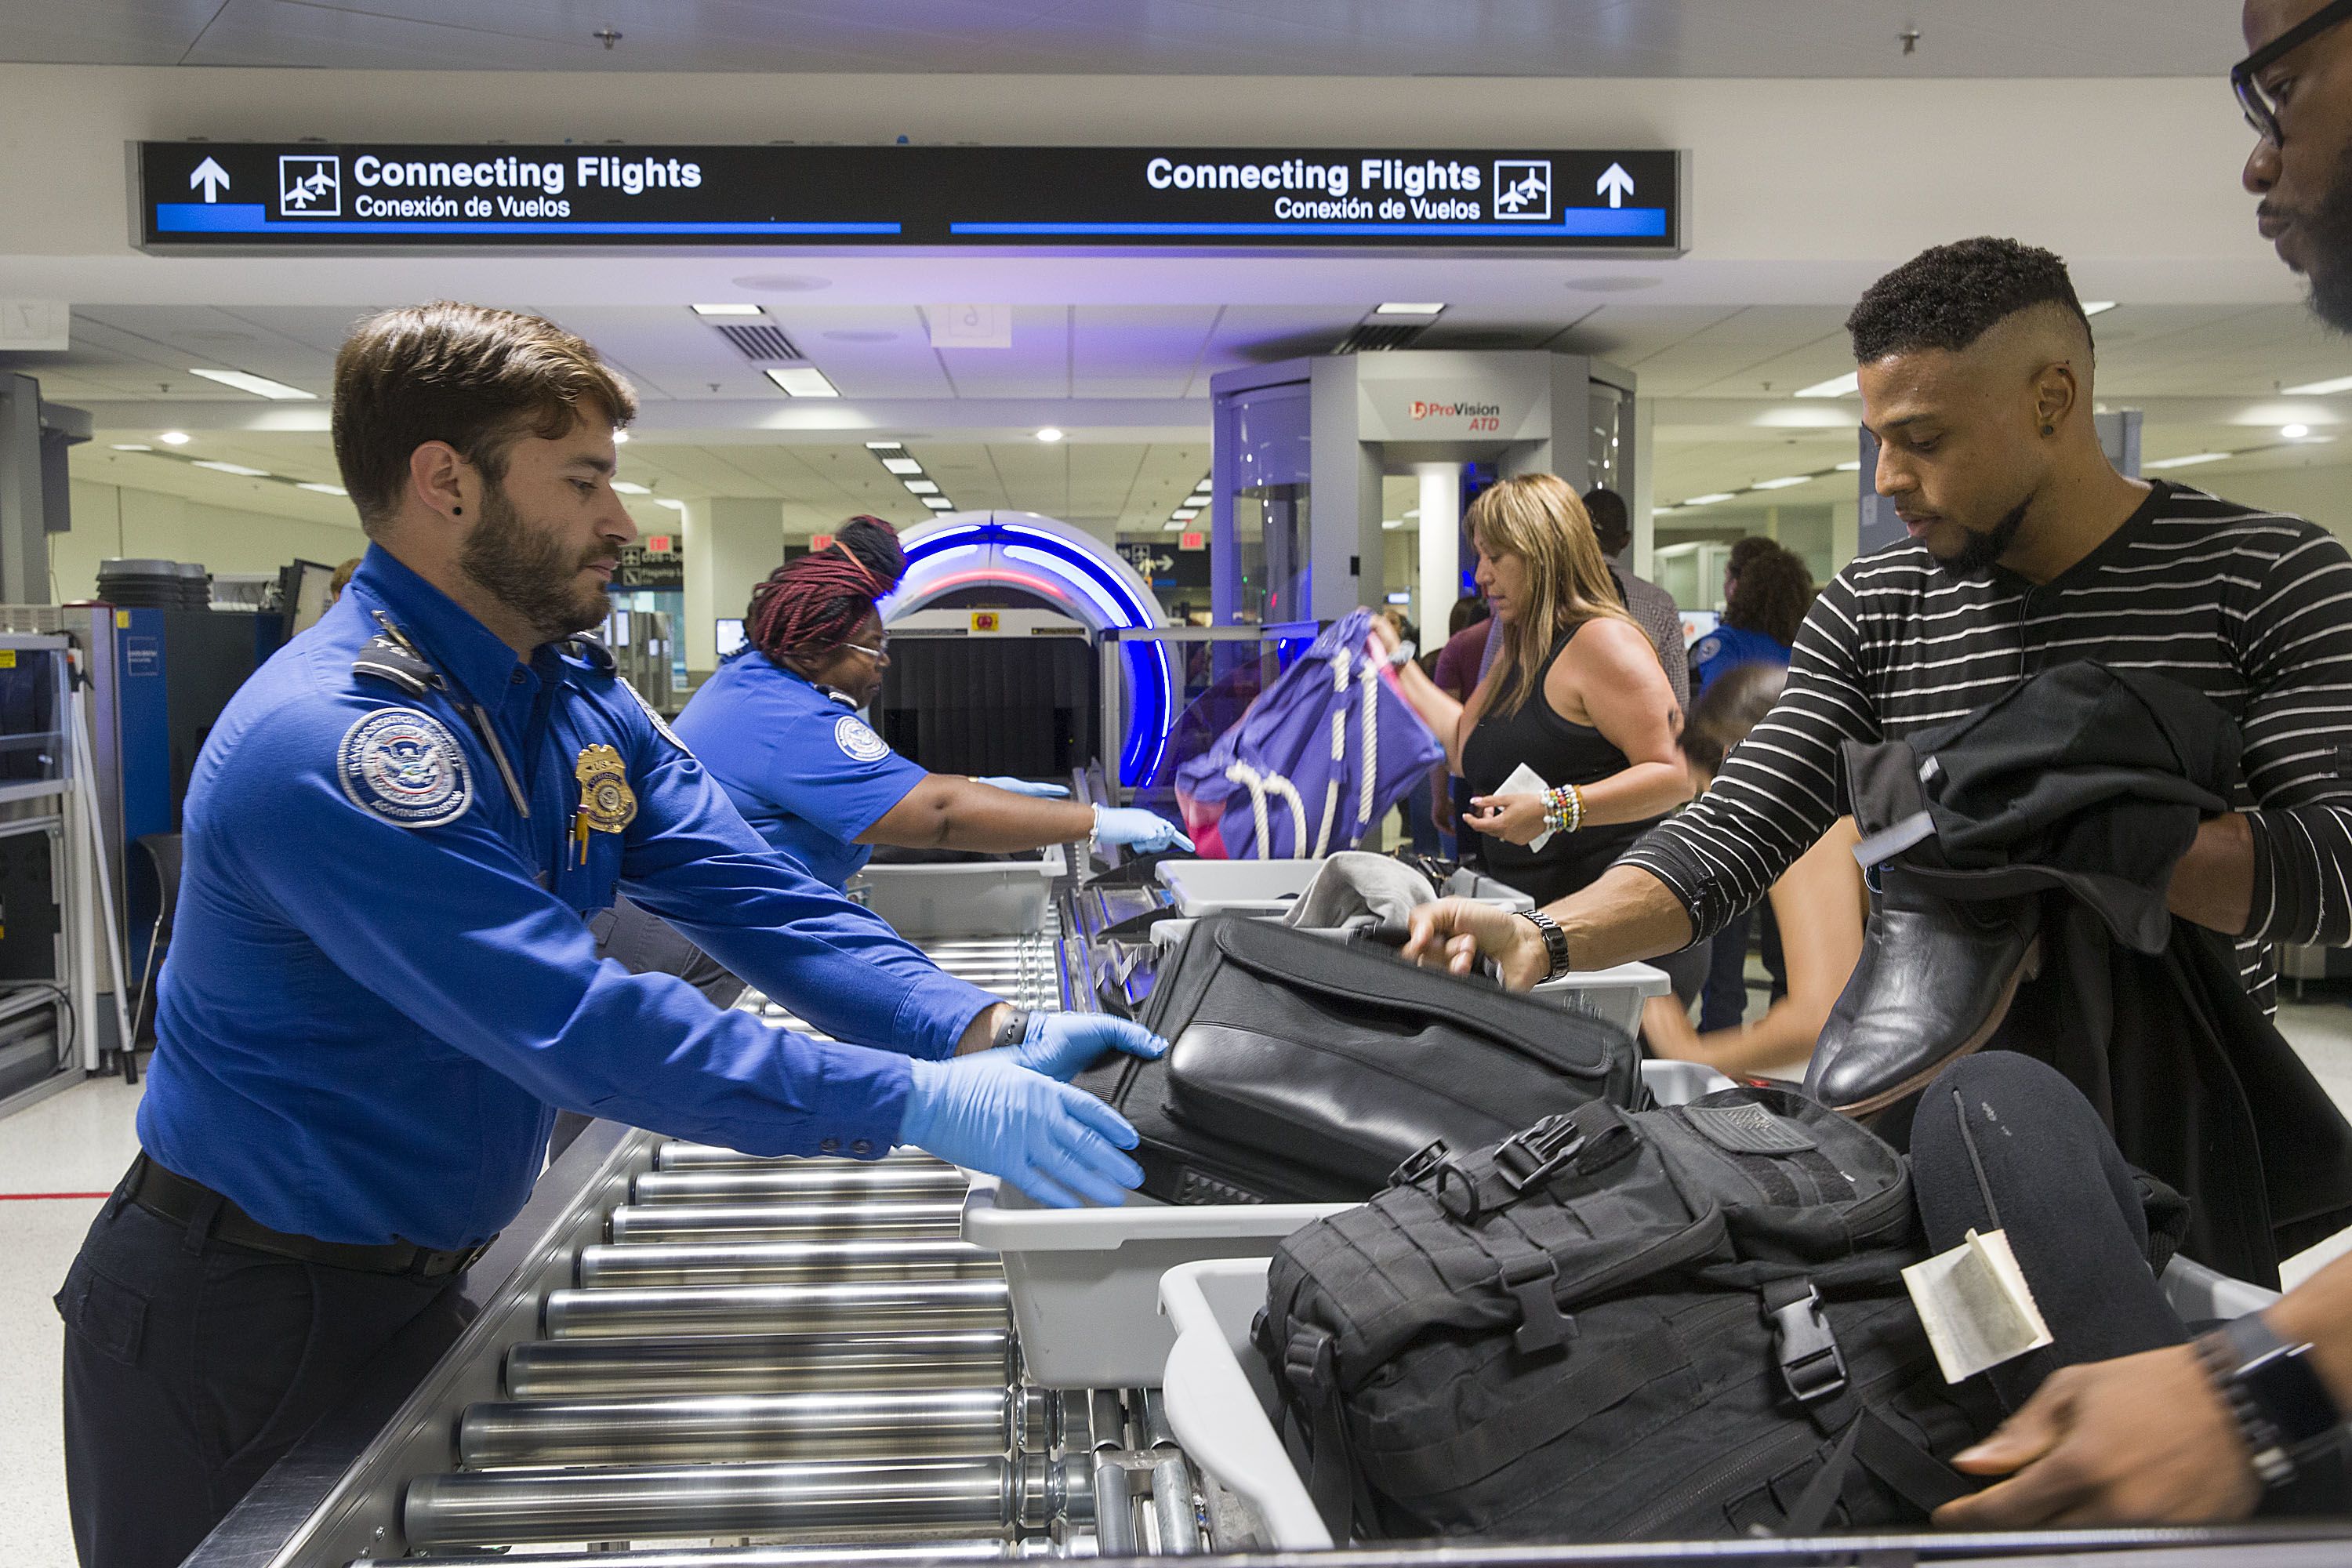 How to pack a carry-on so you won't have a hassle at airport security